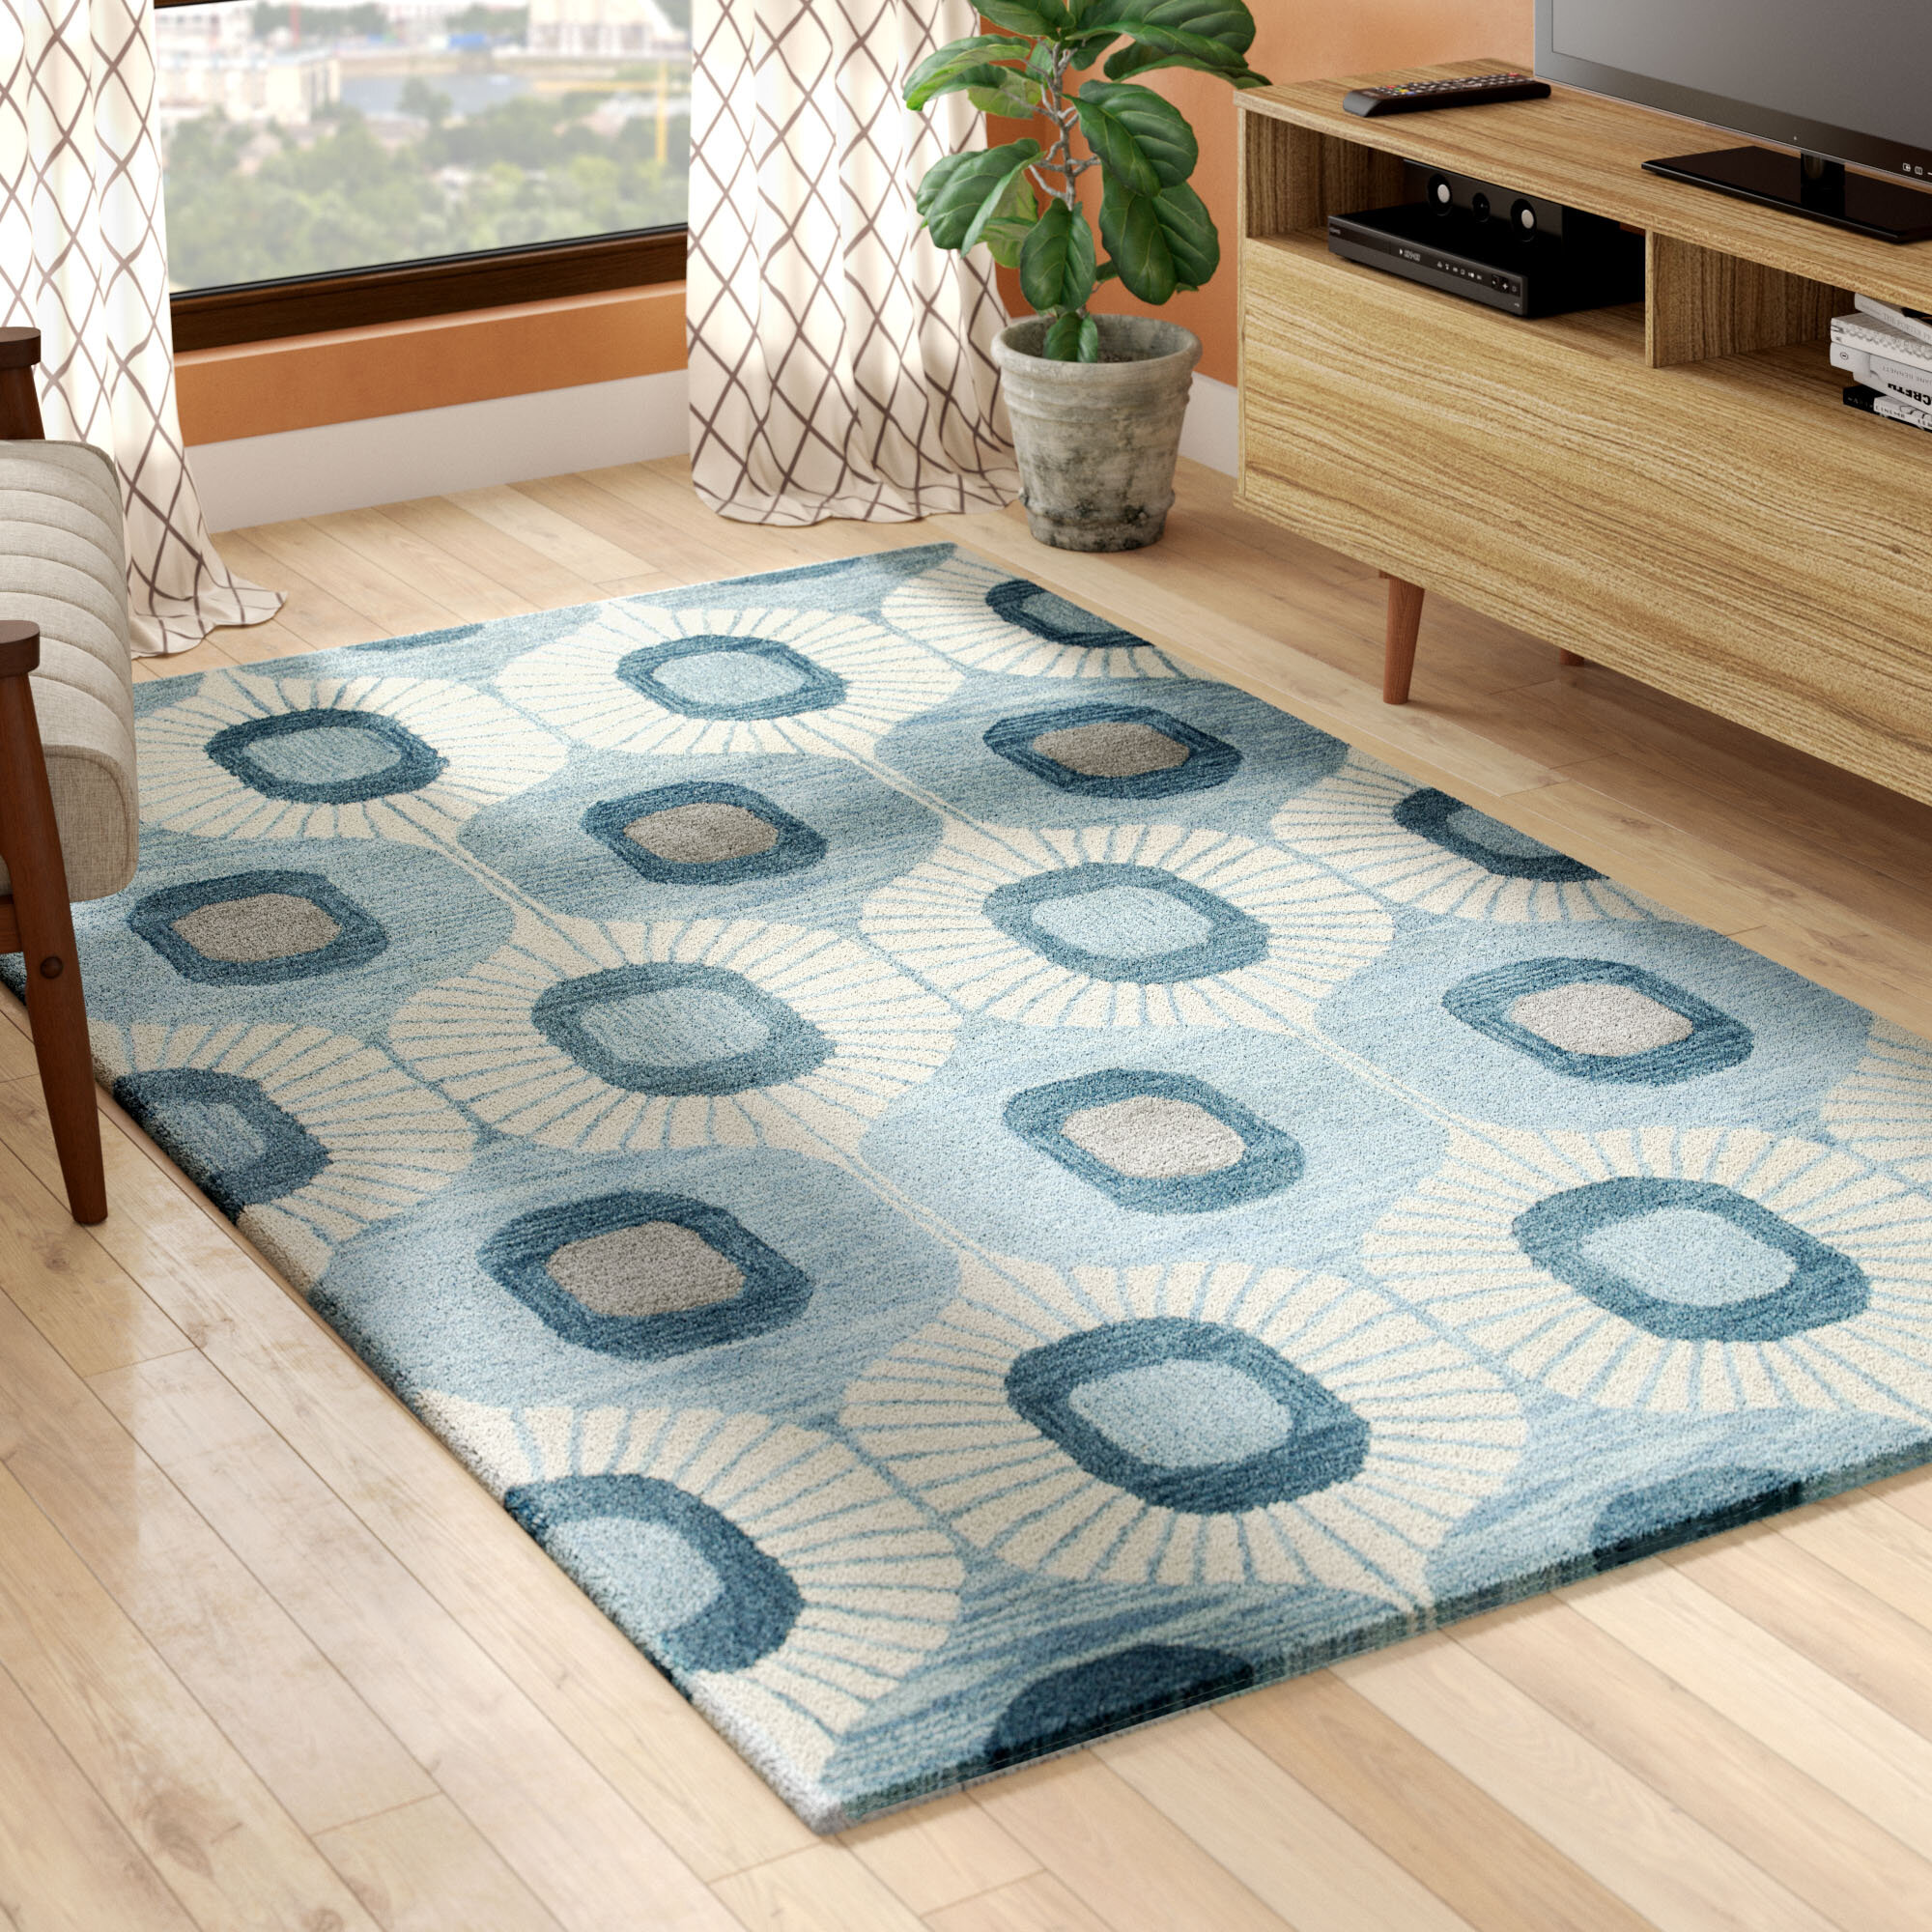 MODERN HANDLOOMED100 % WOOL  RUGS  SMALL LARGE  THICK QUALITY FLOOR CARPET MATS 